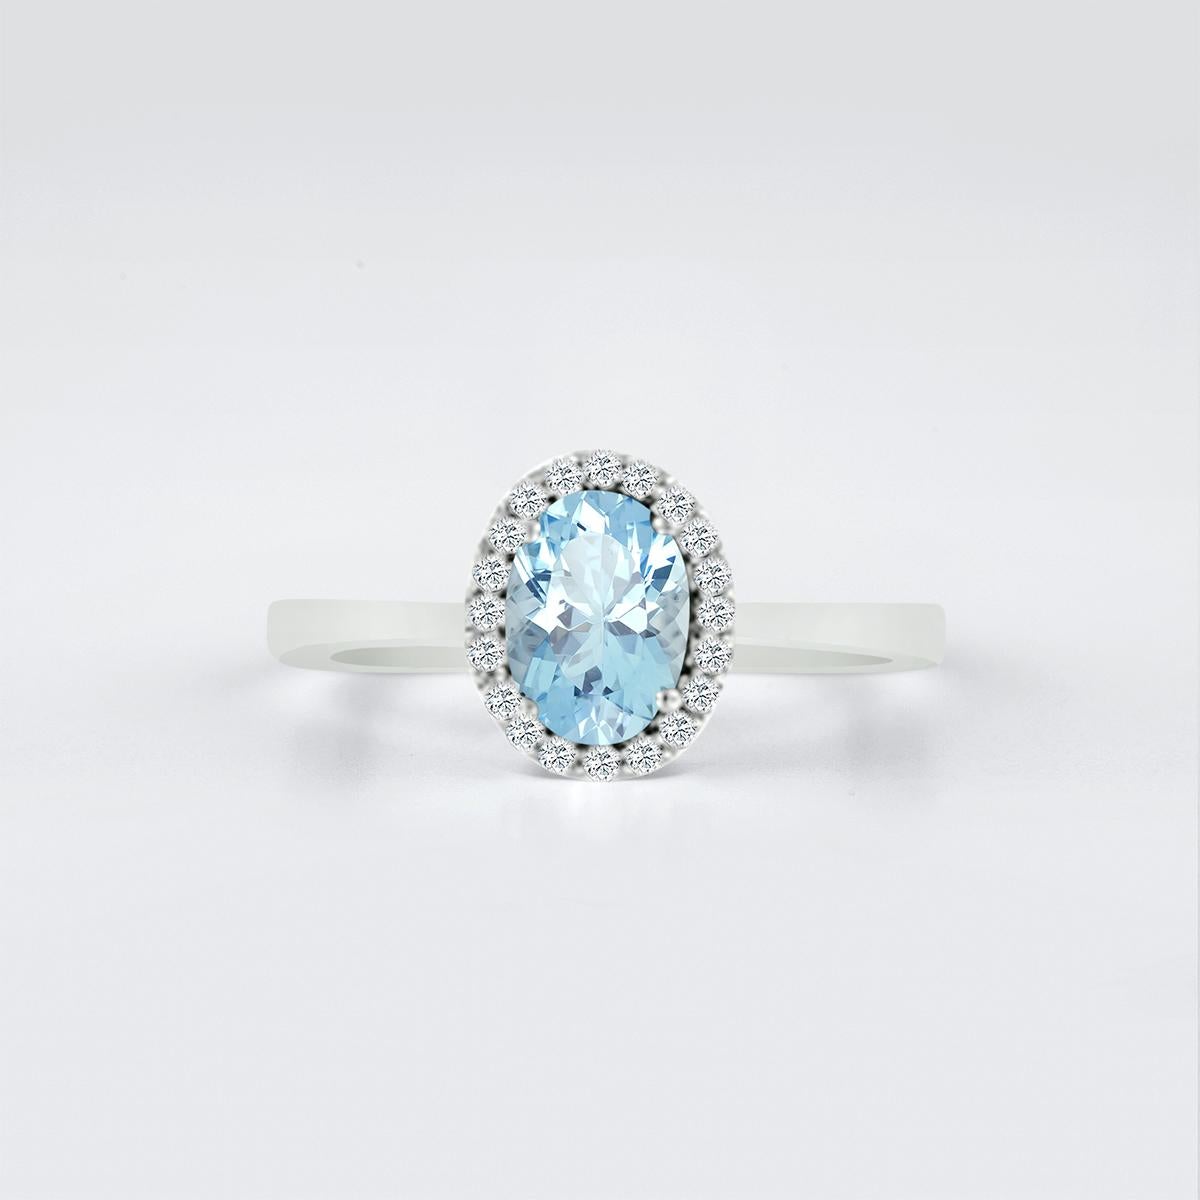 Modern 14k White Gold 0.60cts Aquamarine And Diamond Ring, Style# TS1118AQR 19305/10 For Sale